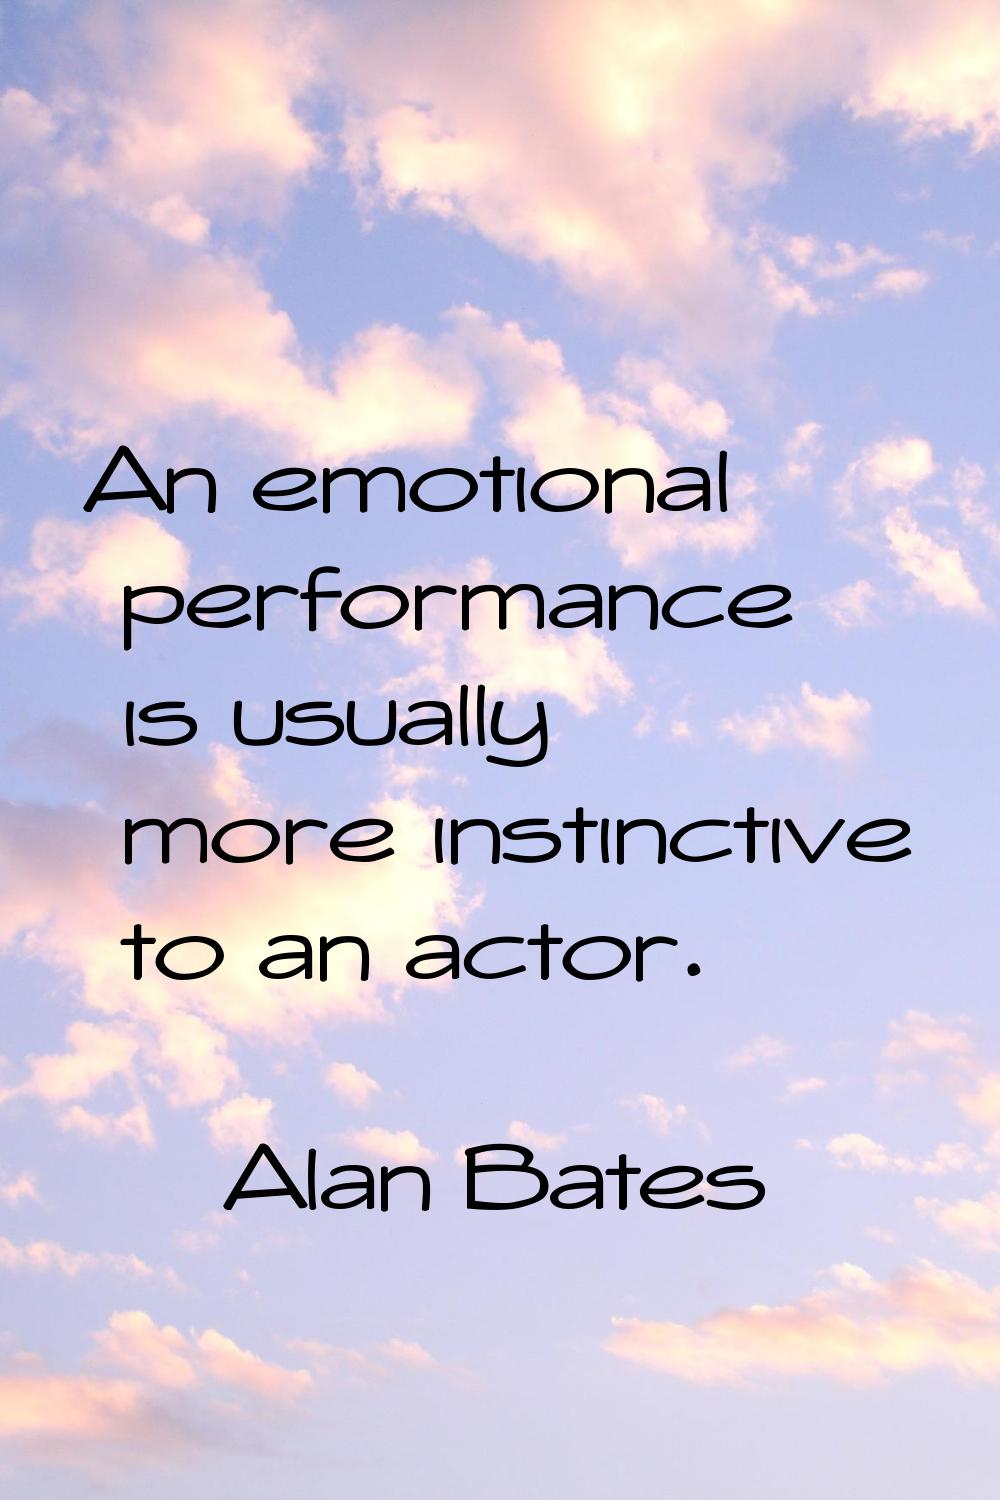 An emotional performance is usually more instinctive to an actor.